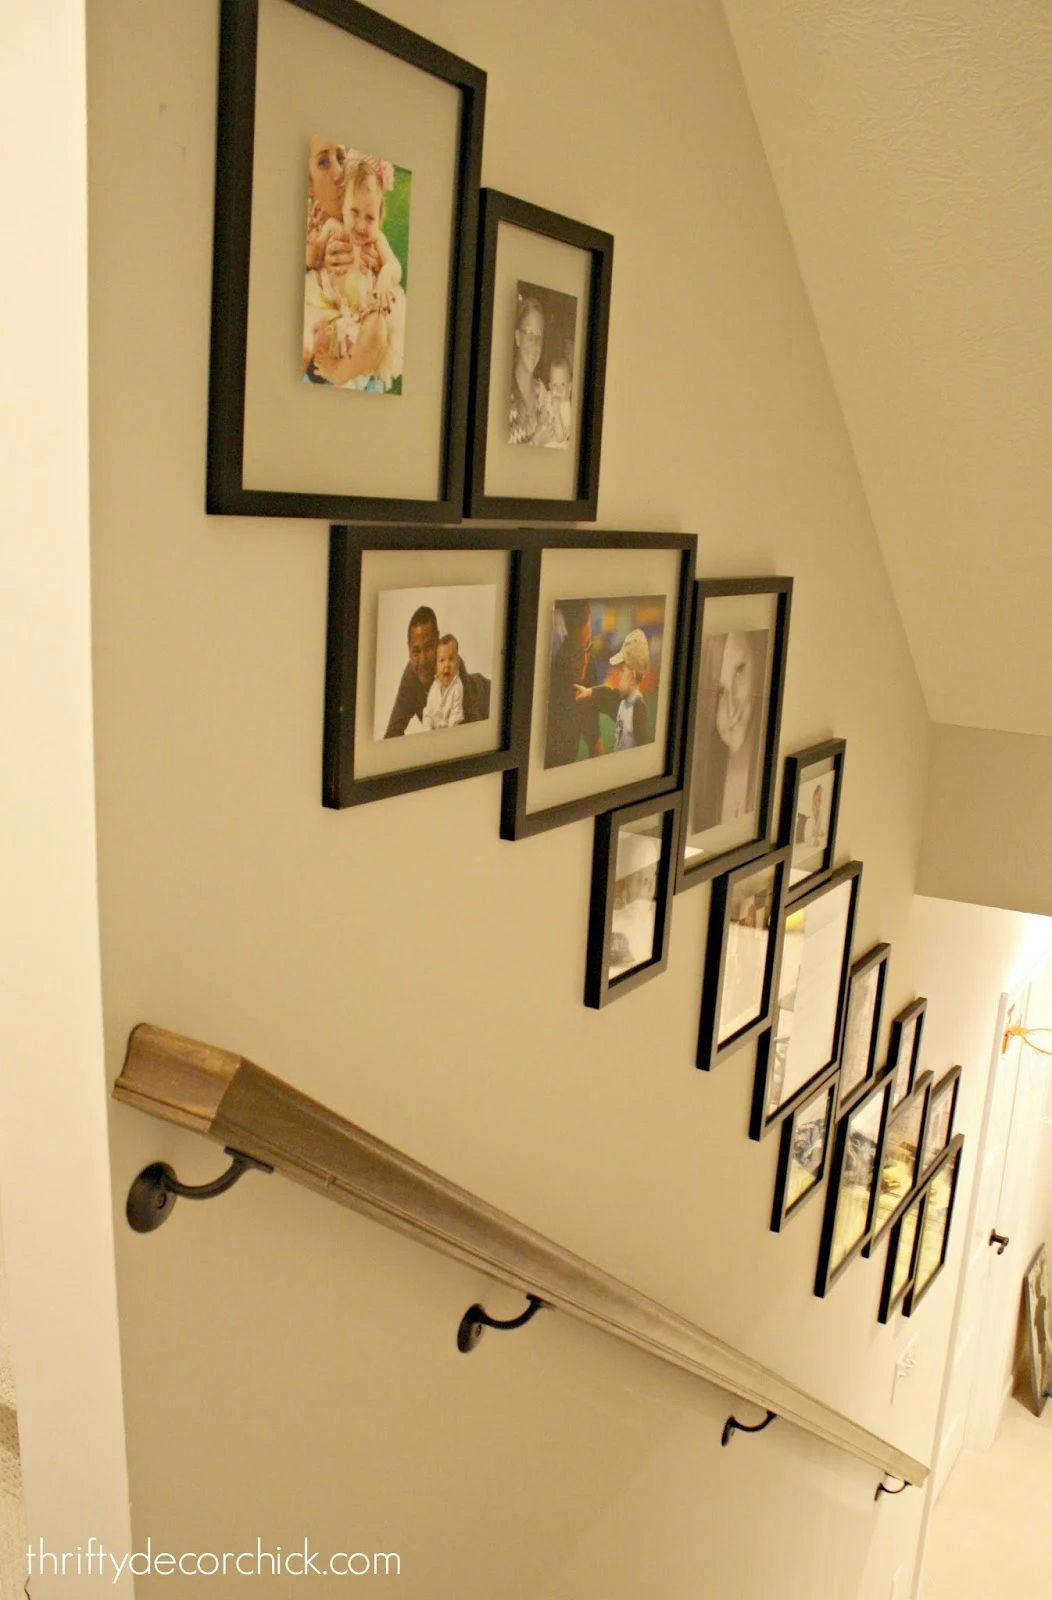 Gallery wall with design going down the stairs